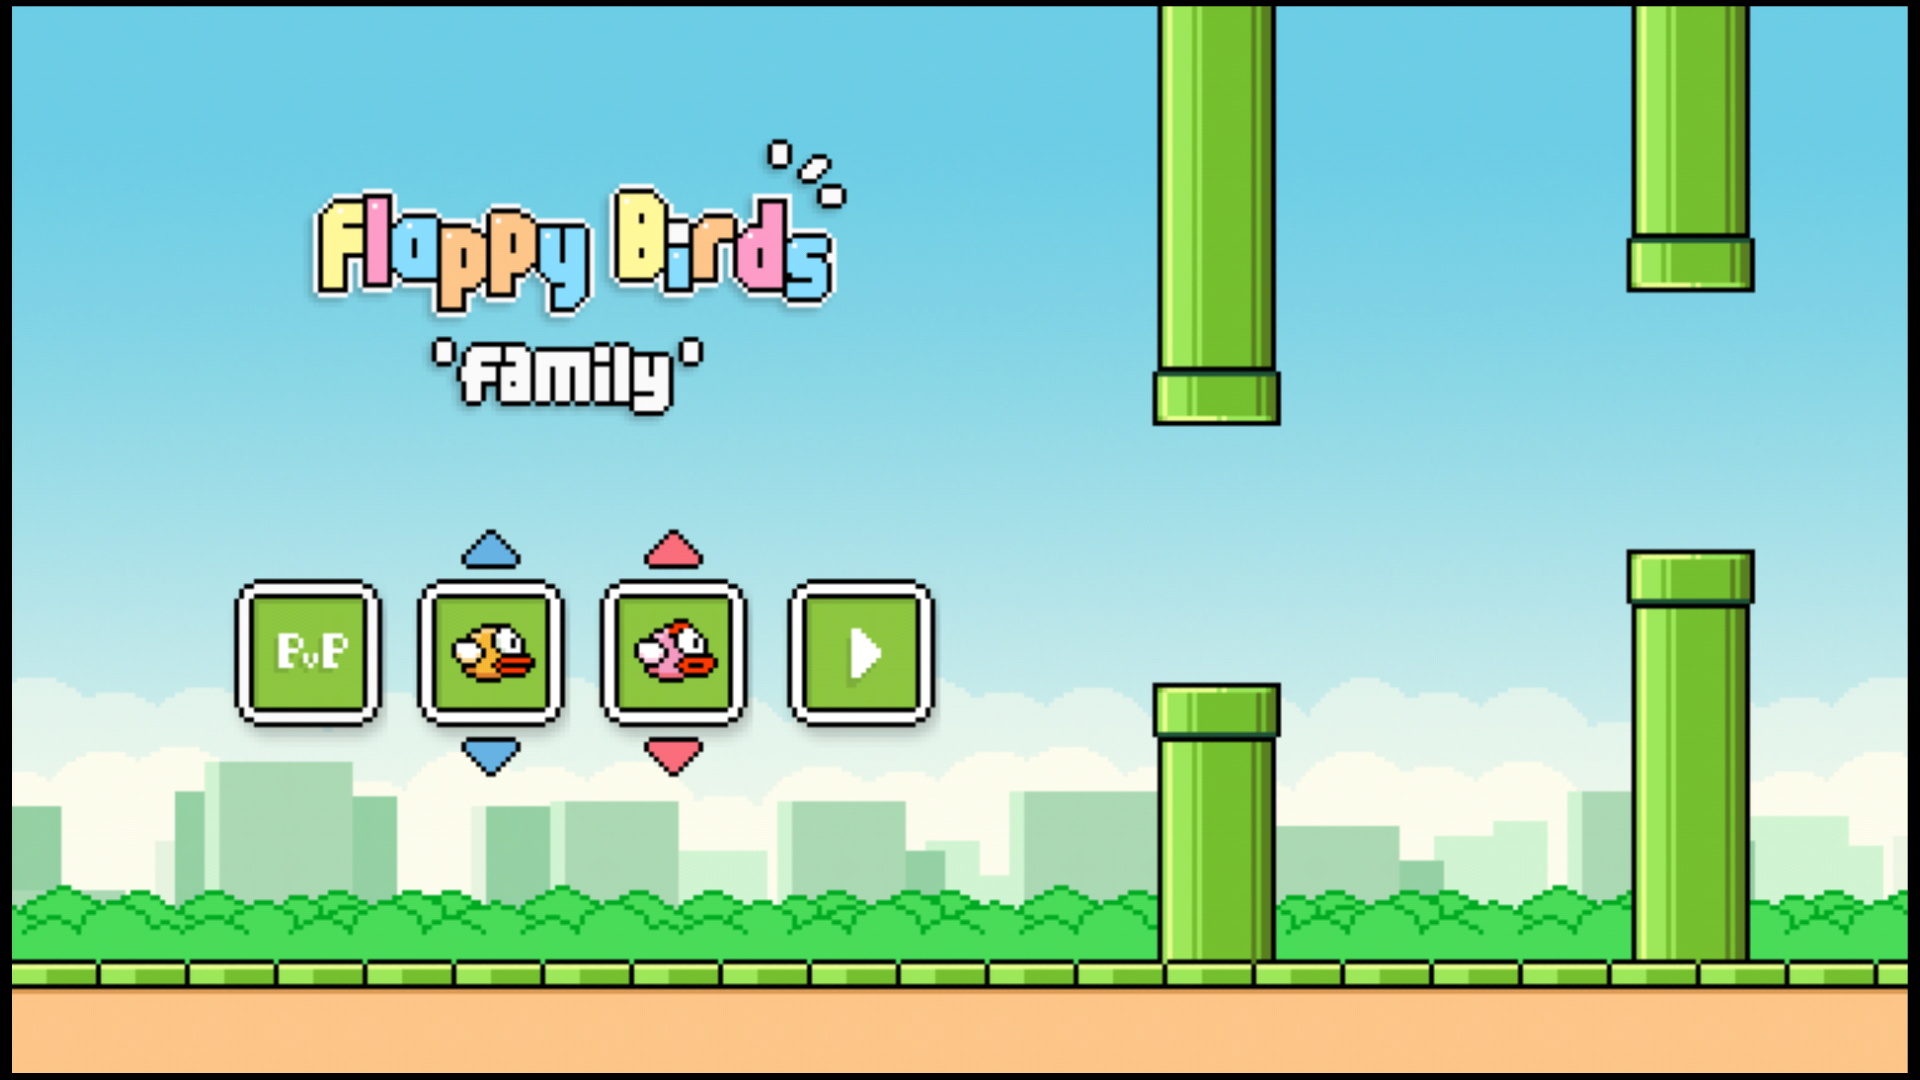 Download the Addictive Background Game Flappy Bird For Your Device